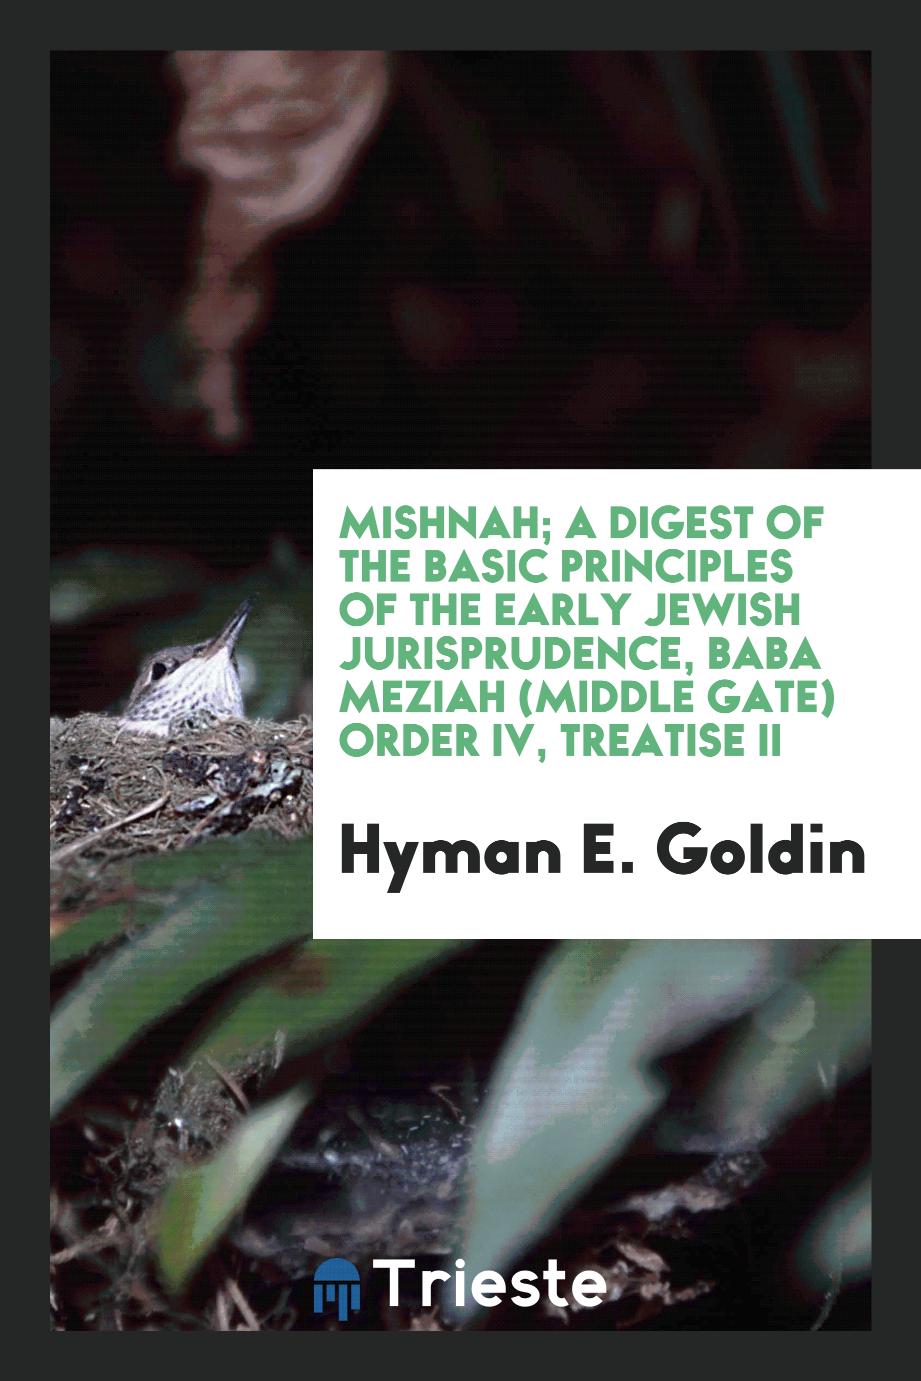 Mishnah; a digest of the basic principles of the early Jewish jurisprudence, Baba meziah (Middle gate) order IV, treatise II